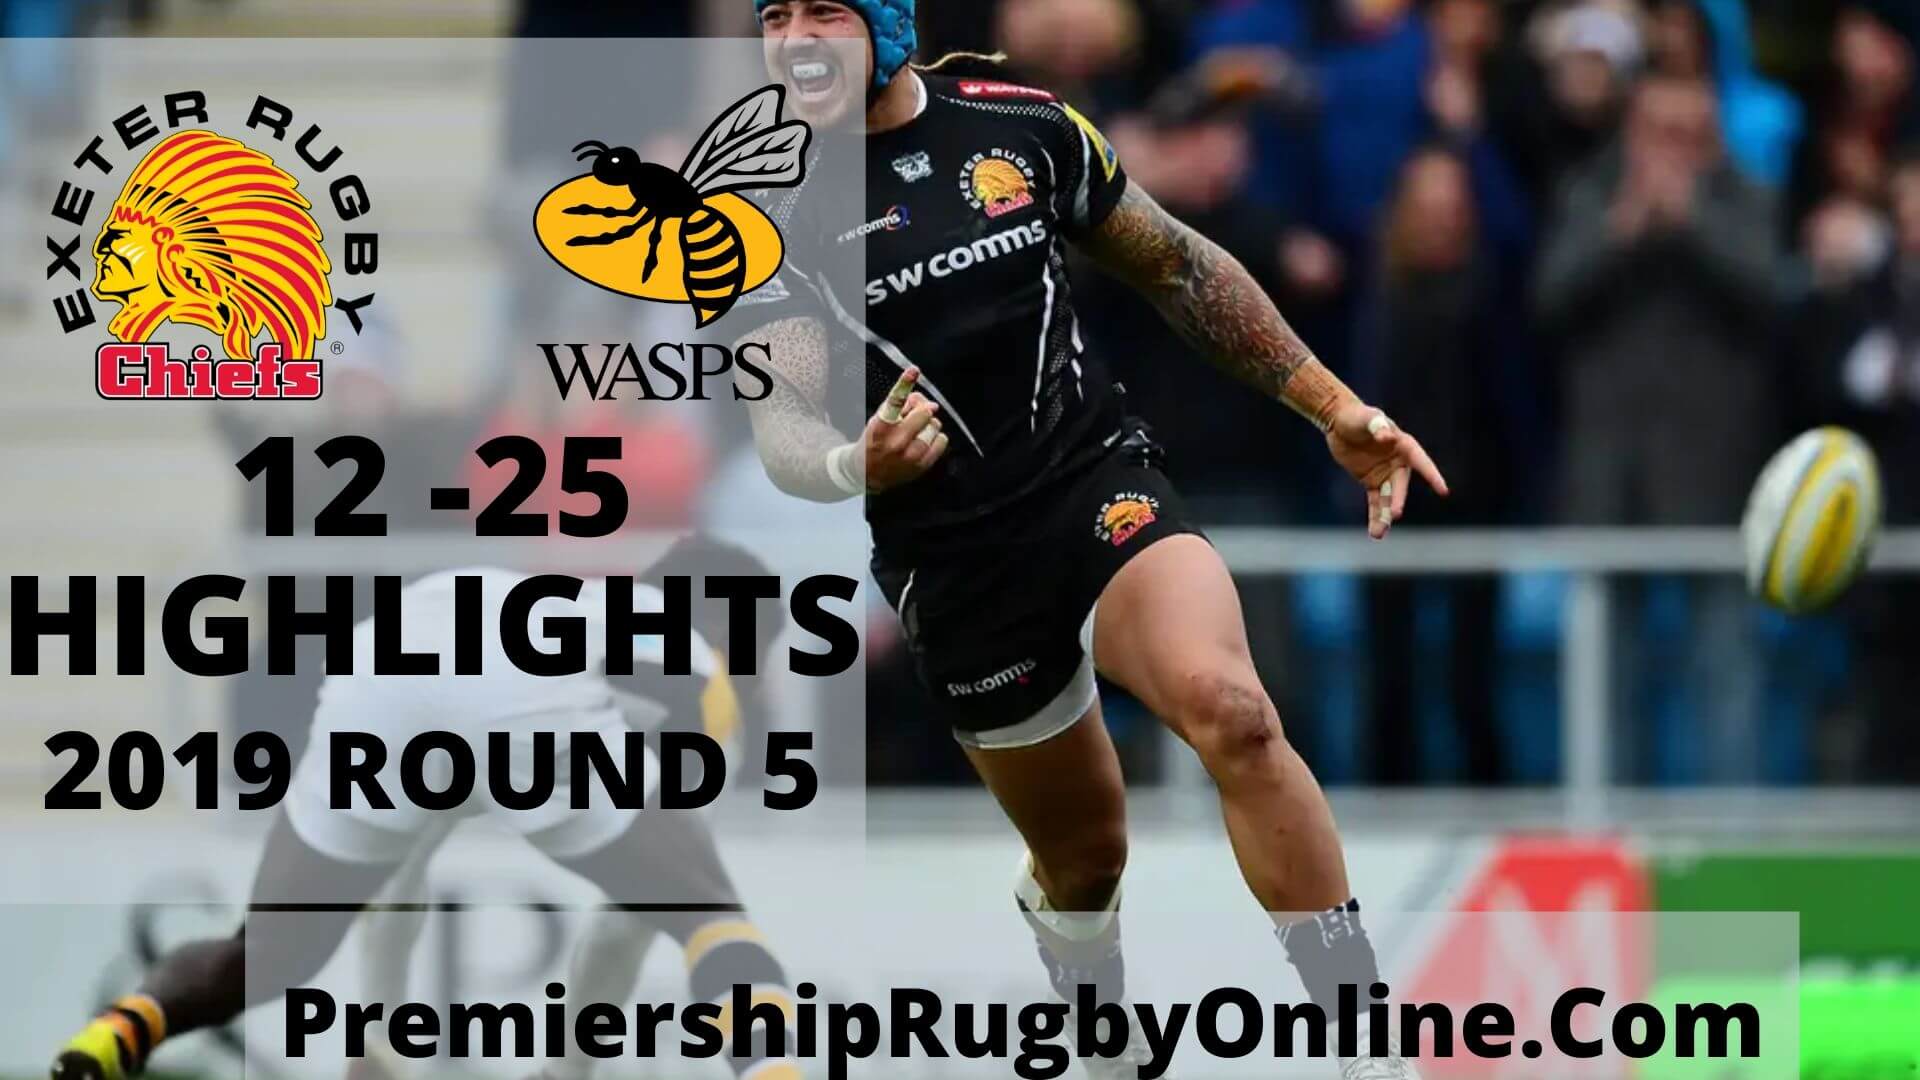 Exeter Chiefs vs Wasps Highlights 2019 Rd 5